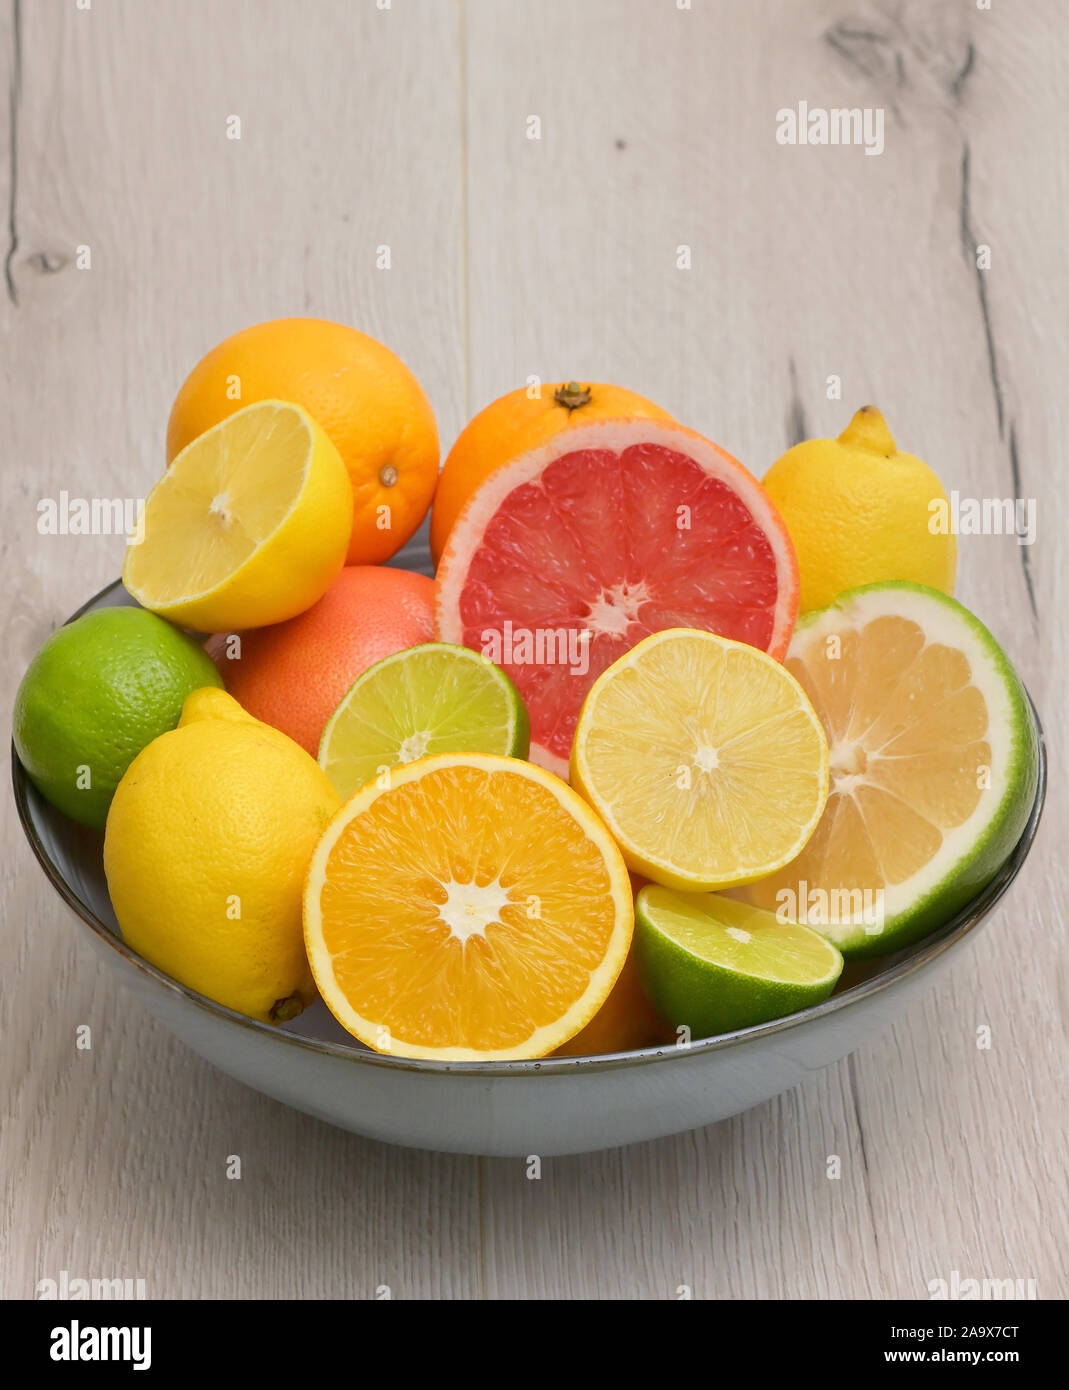 Colorful Assortment Of Citrus Fruit on Wooden Table Stock Photo